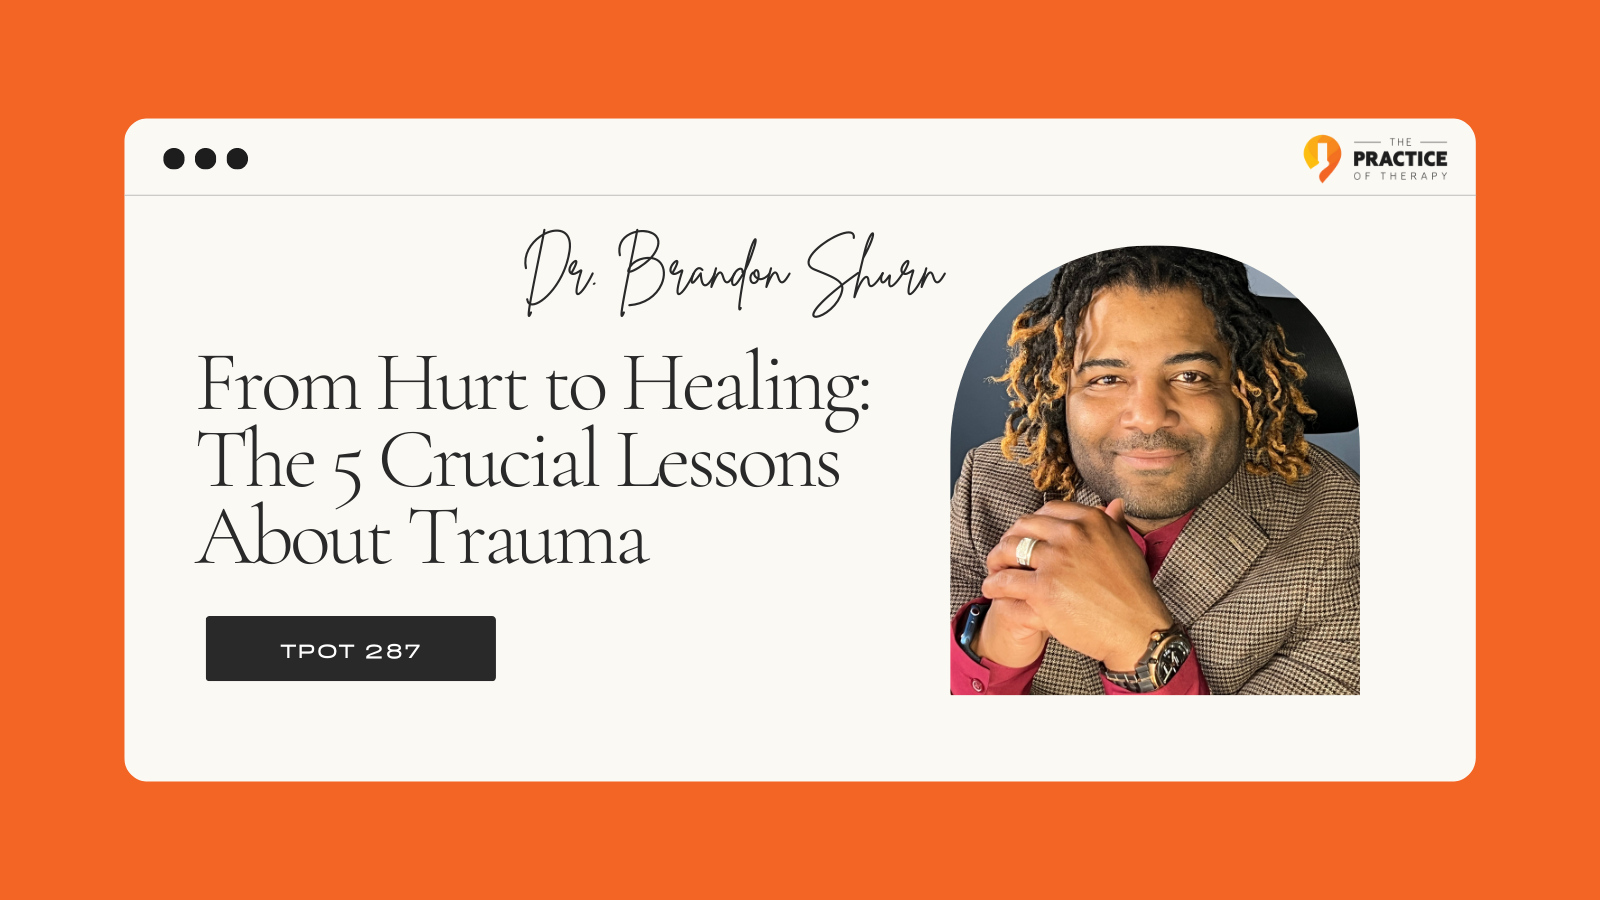 Dr. Brandon Shurn From Hurt to Healing The 5 Crucial Lessons About Trauma TPOT 287